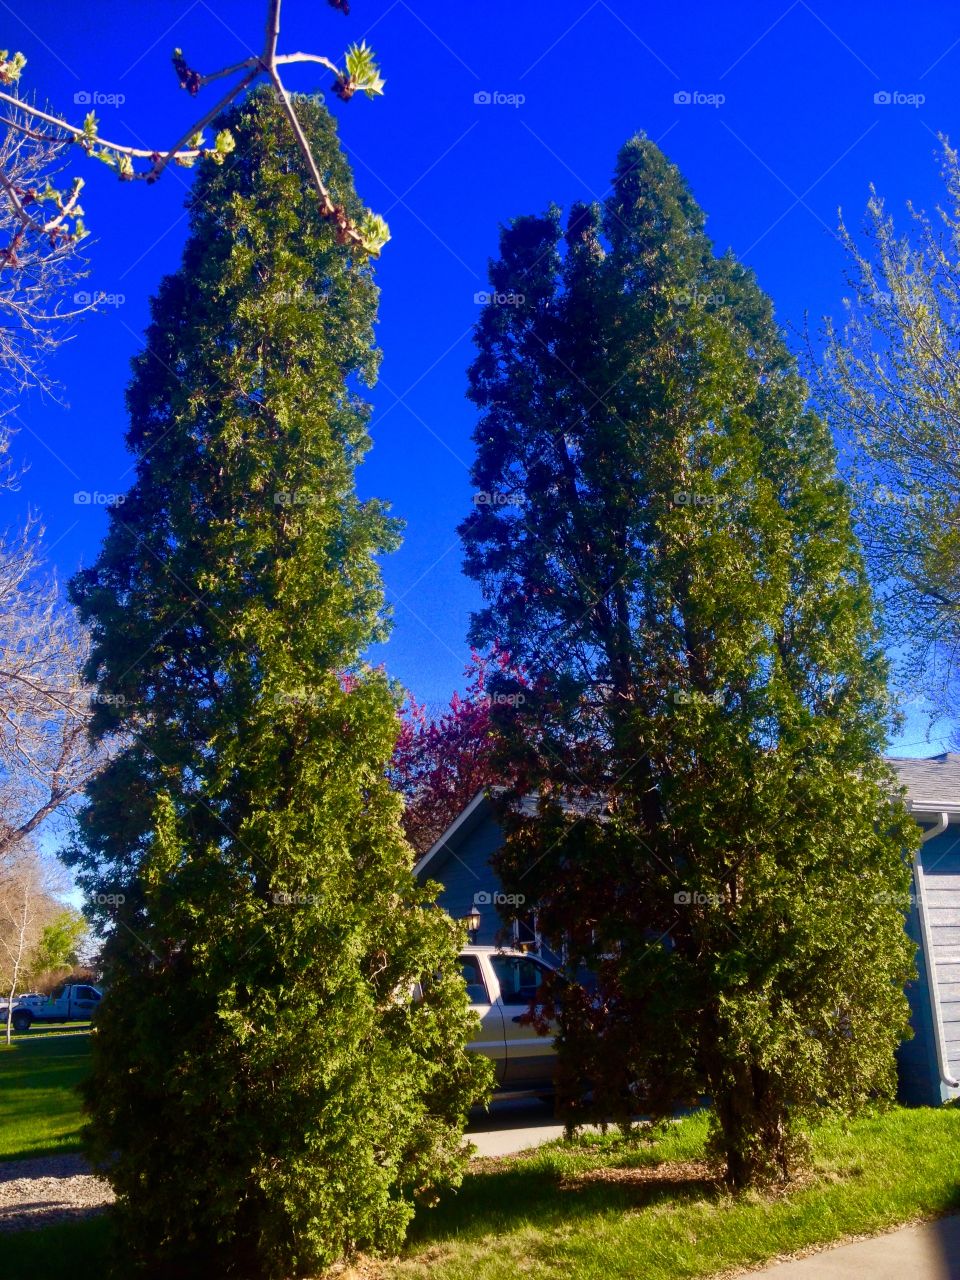 Juniper high. Two junipers reaching for the sky